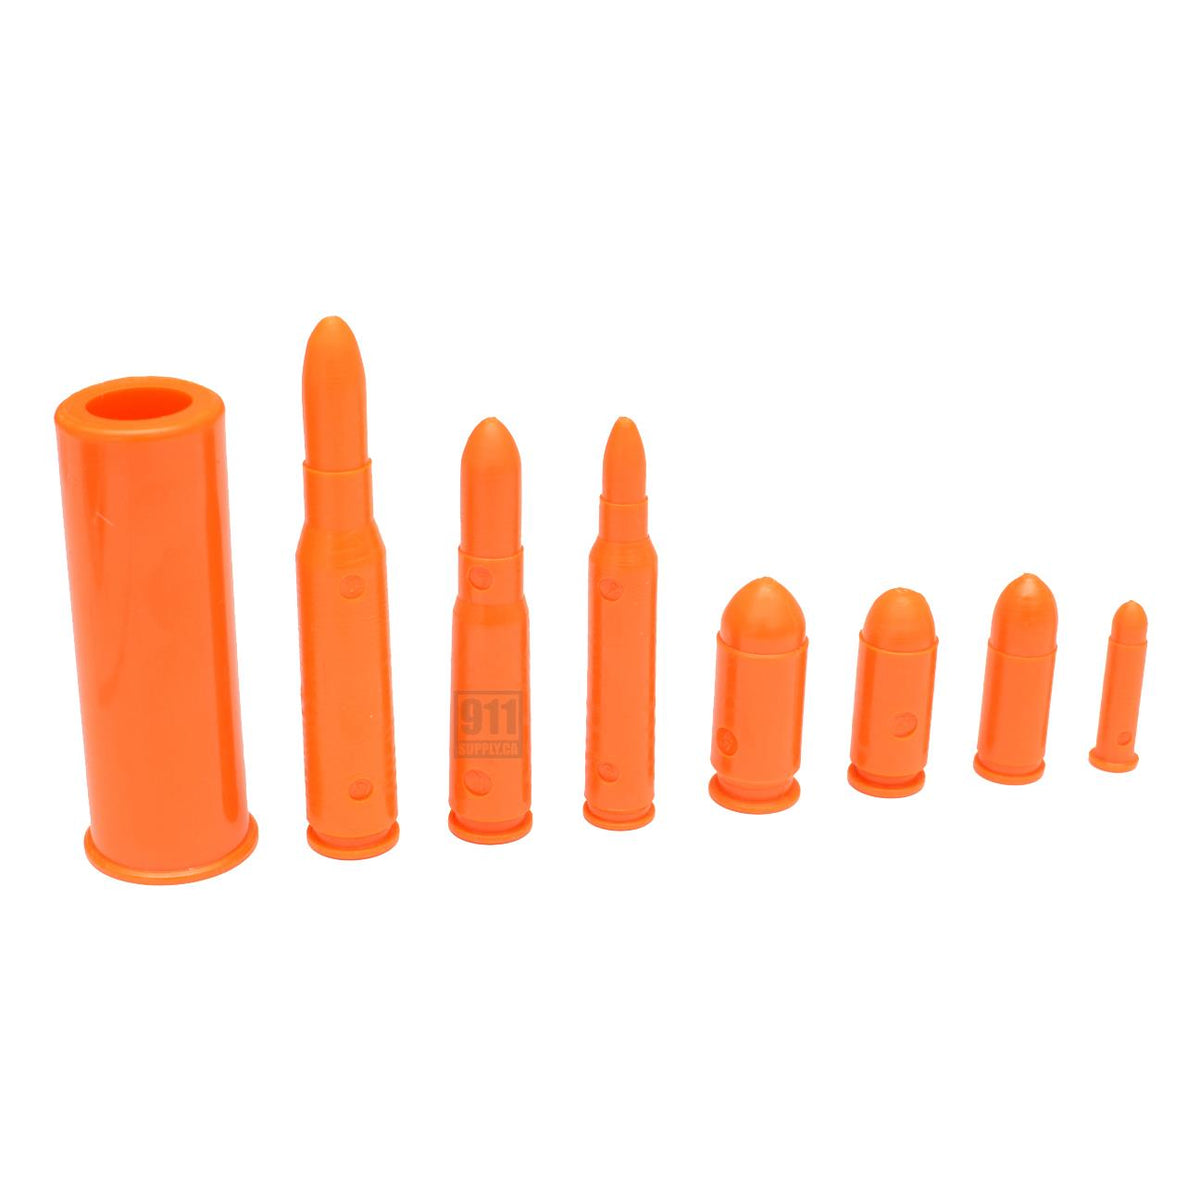 Saf-T-Trainer Dummy Rounds | 911supply.ca